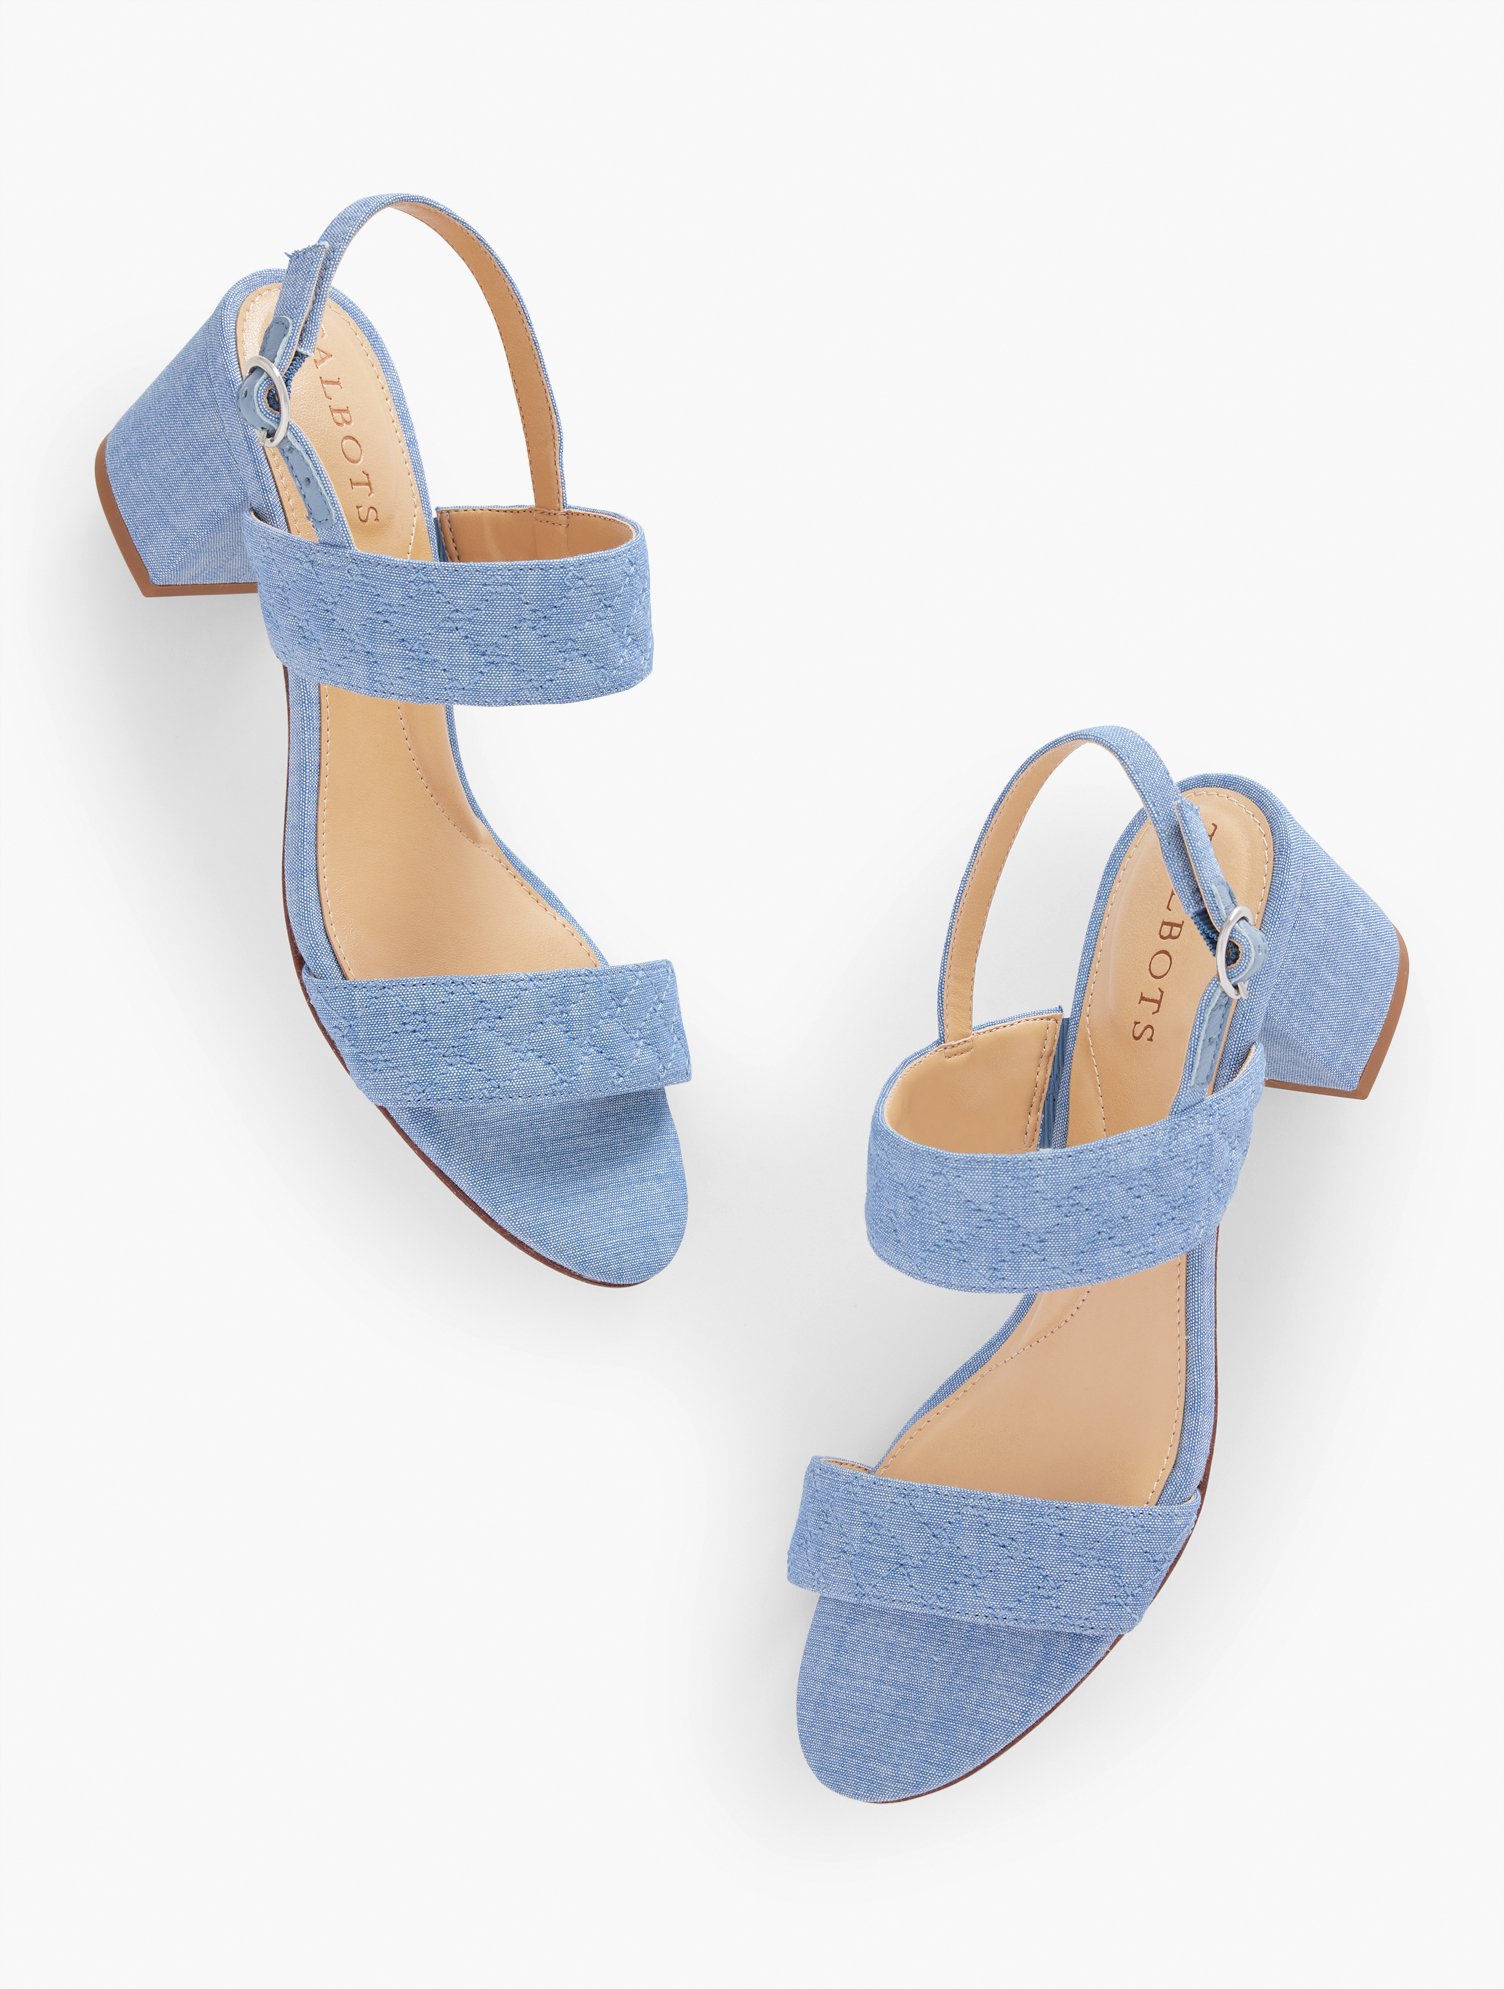 Talbots Mimi Quilted Sandals - Chambray - Light Blue - 11m - 100% Cotton